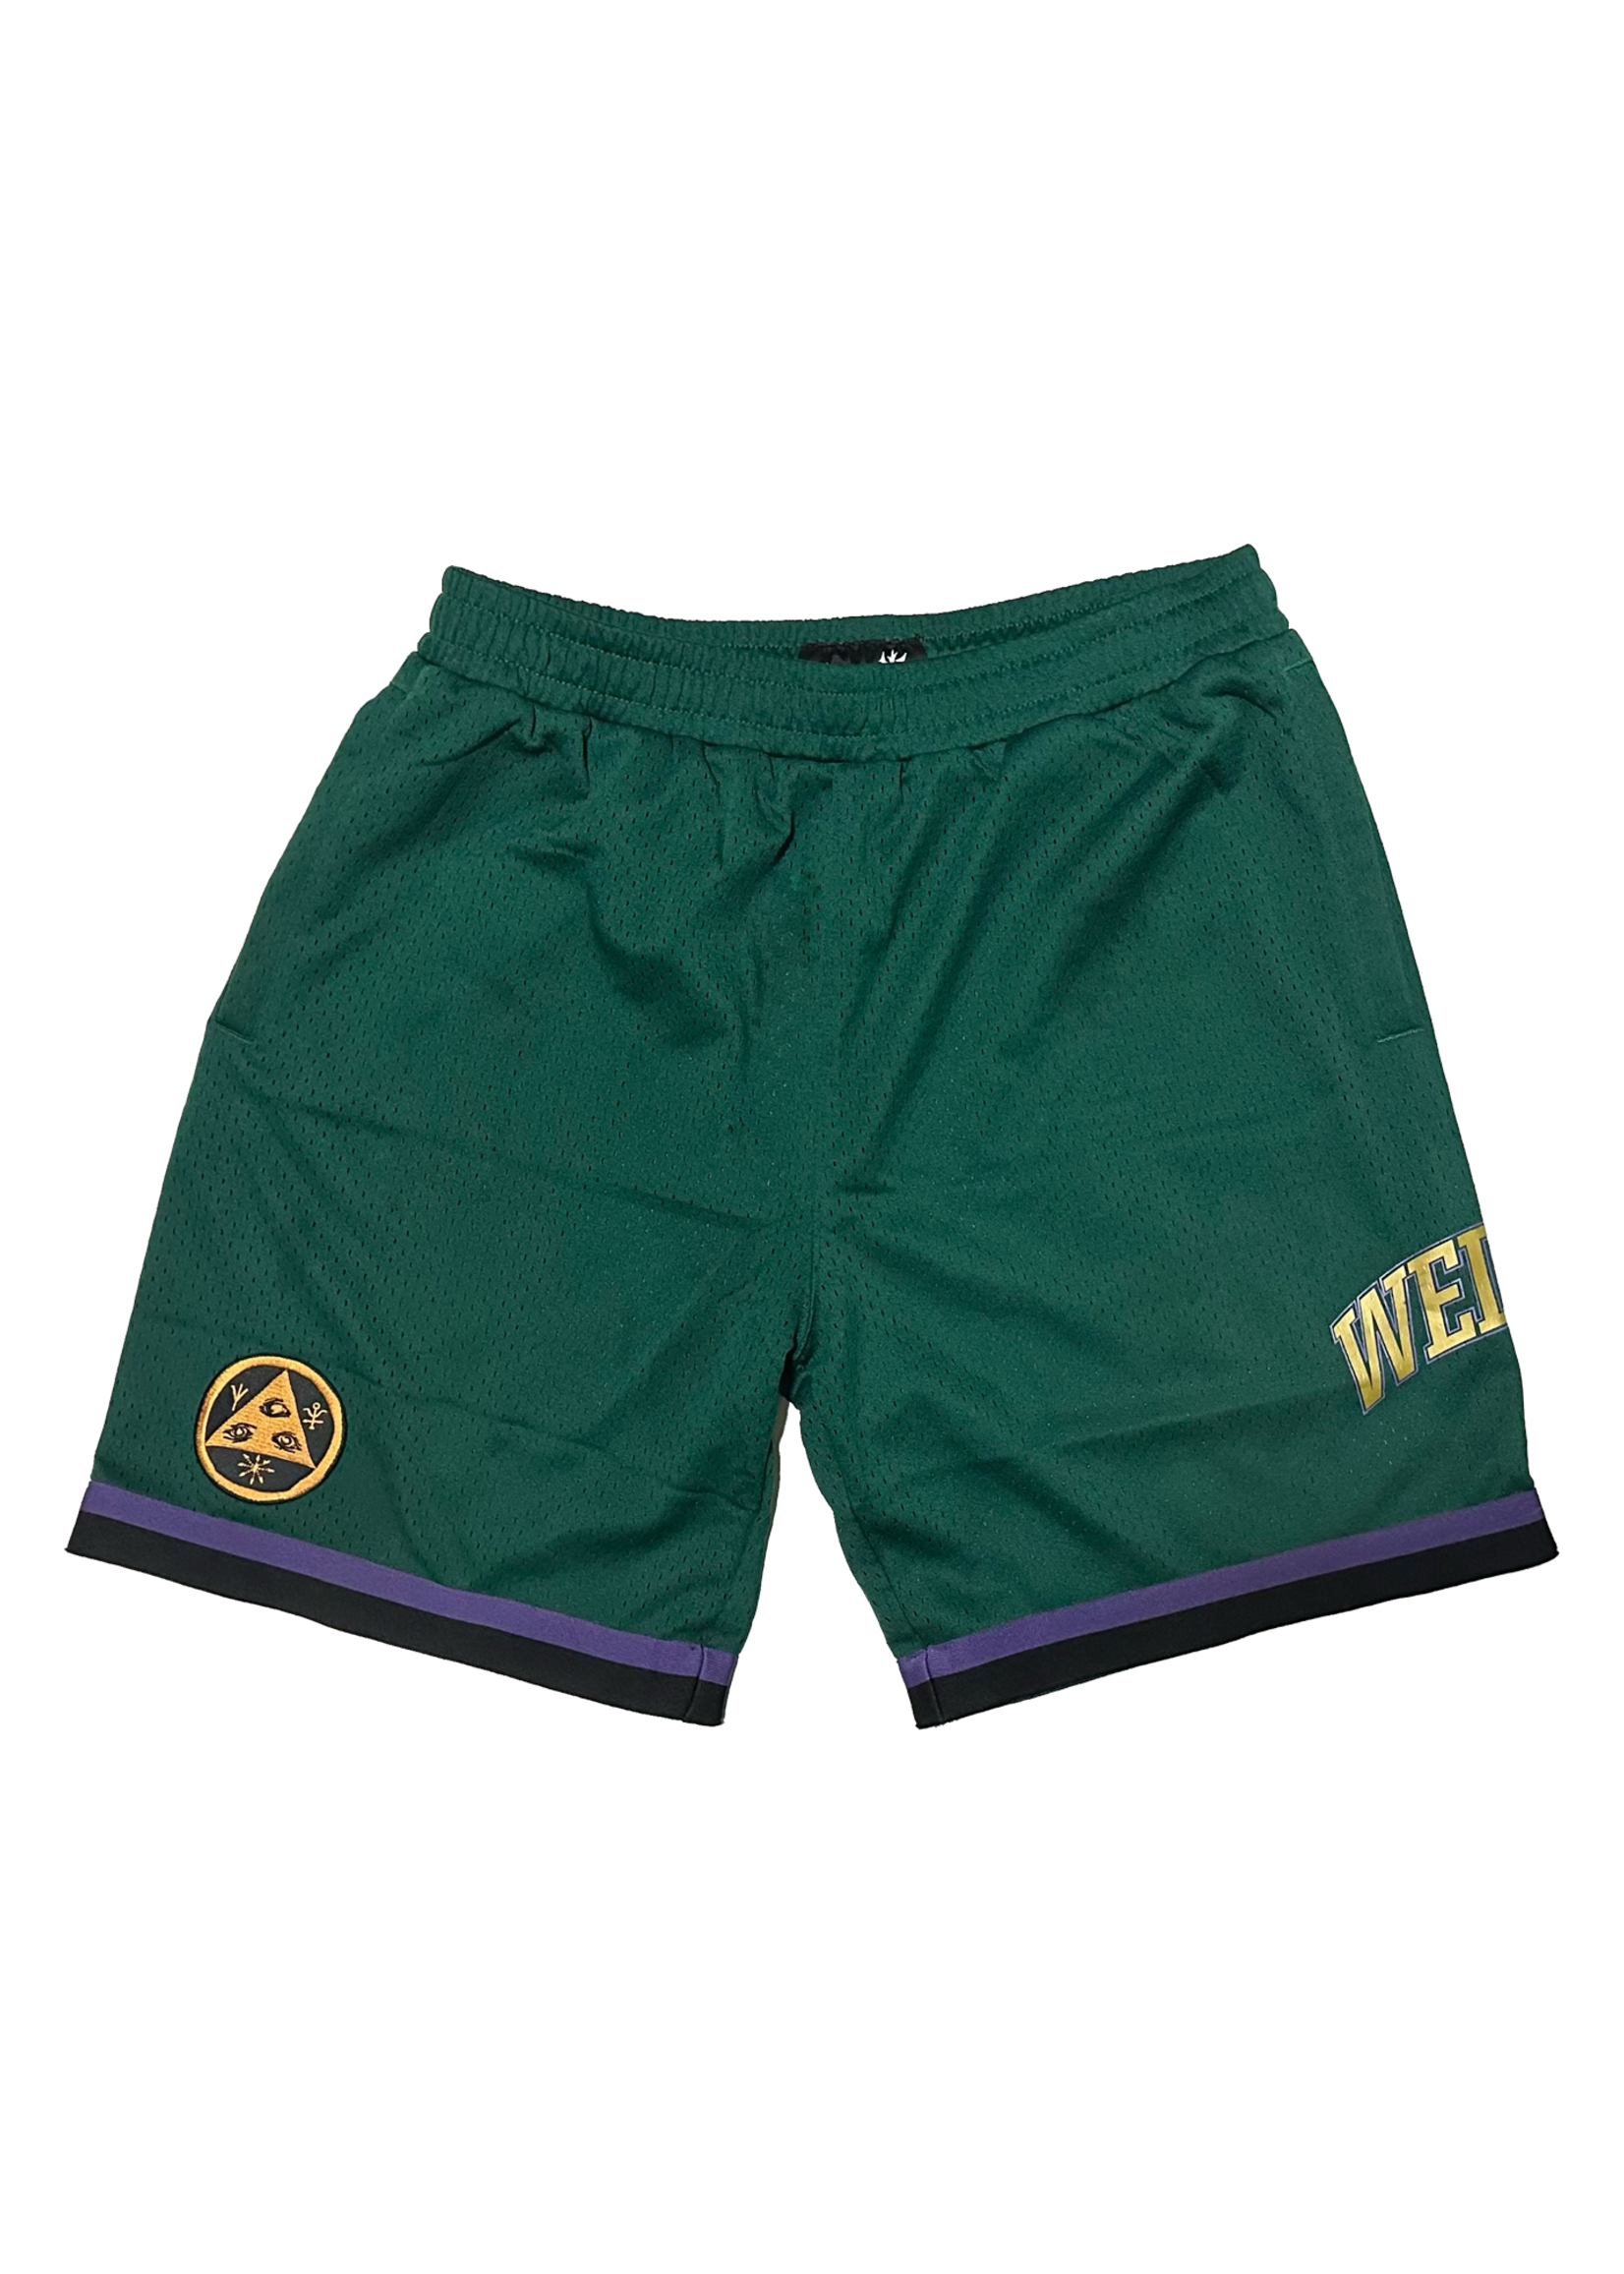 Welcome Welcome Skateboards - LEAGUE MESH BASKETBALL SHORT- FOREST